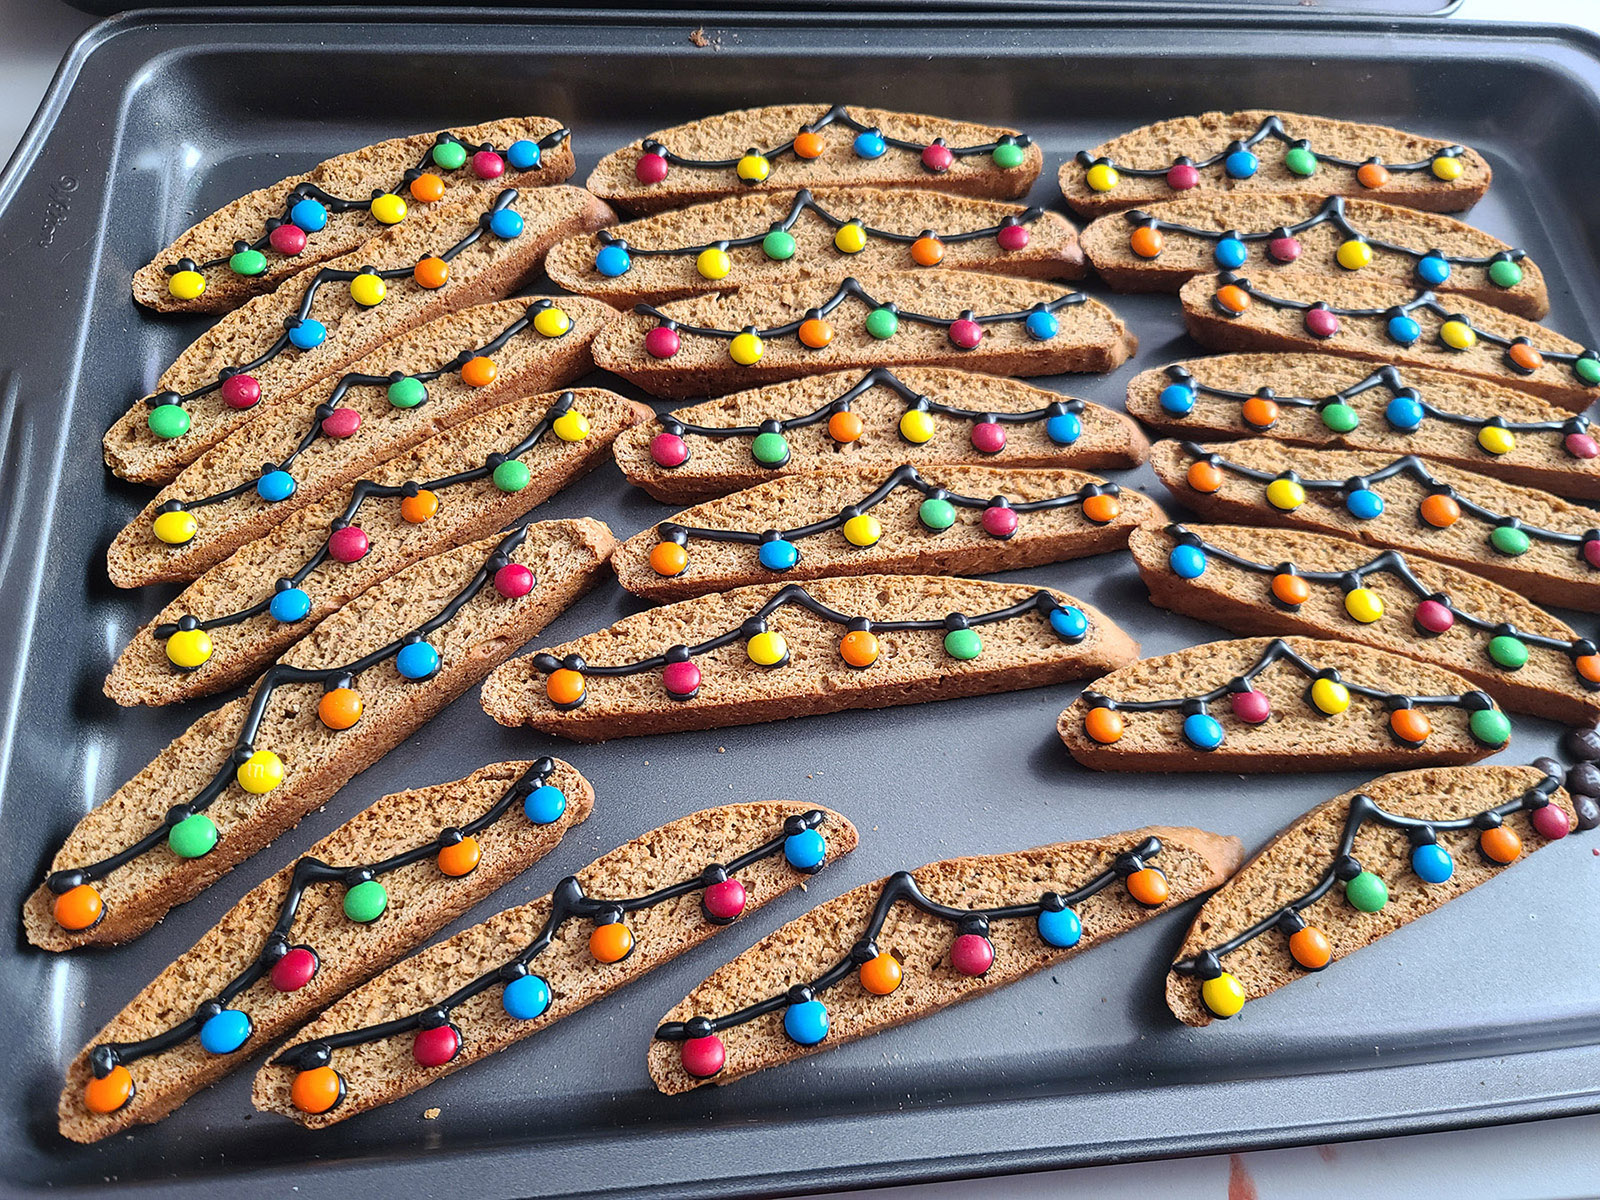 A pan of gingerbread biscotti decorated to look like it's strung with Christmas lights.